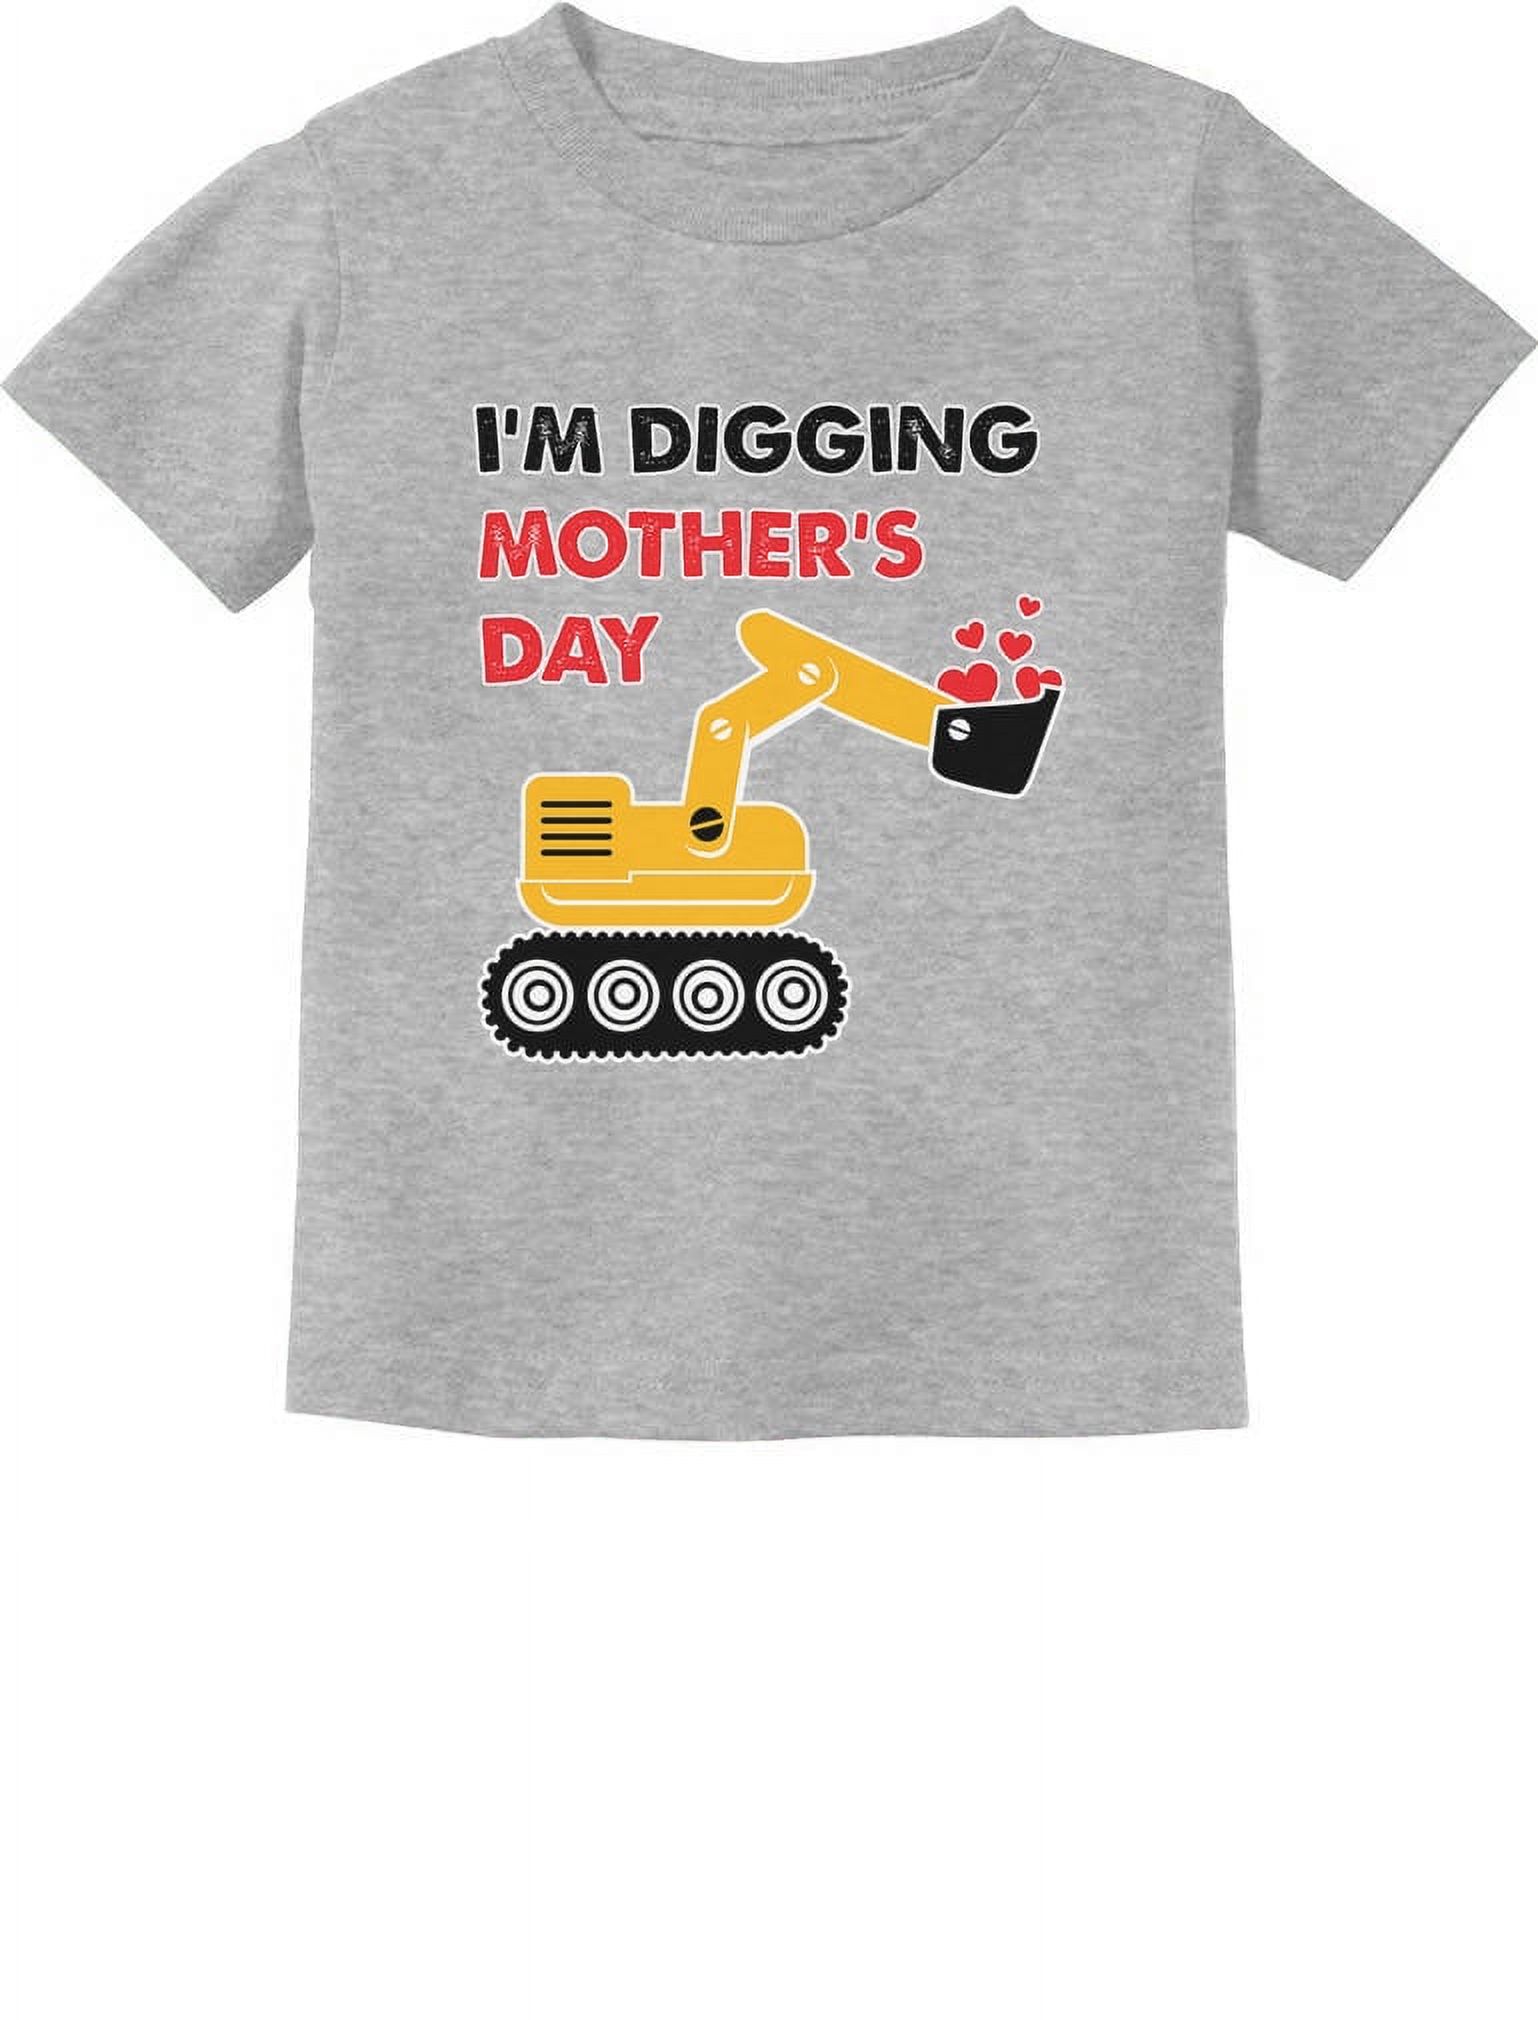 Tstars Boys Unisex Best Gift for Mother's Day Shirts Tshirt I'm Digging Mothers Day Tractor Kids Cool Cute Gift for Mom Shirts for Boy Mothers Day Gift Toddler Infant Kids T Shirt - image 1 of 7